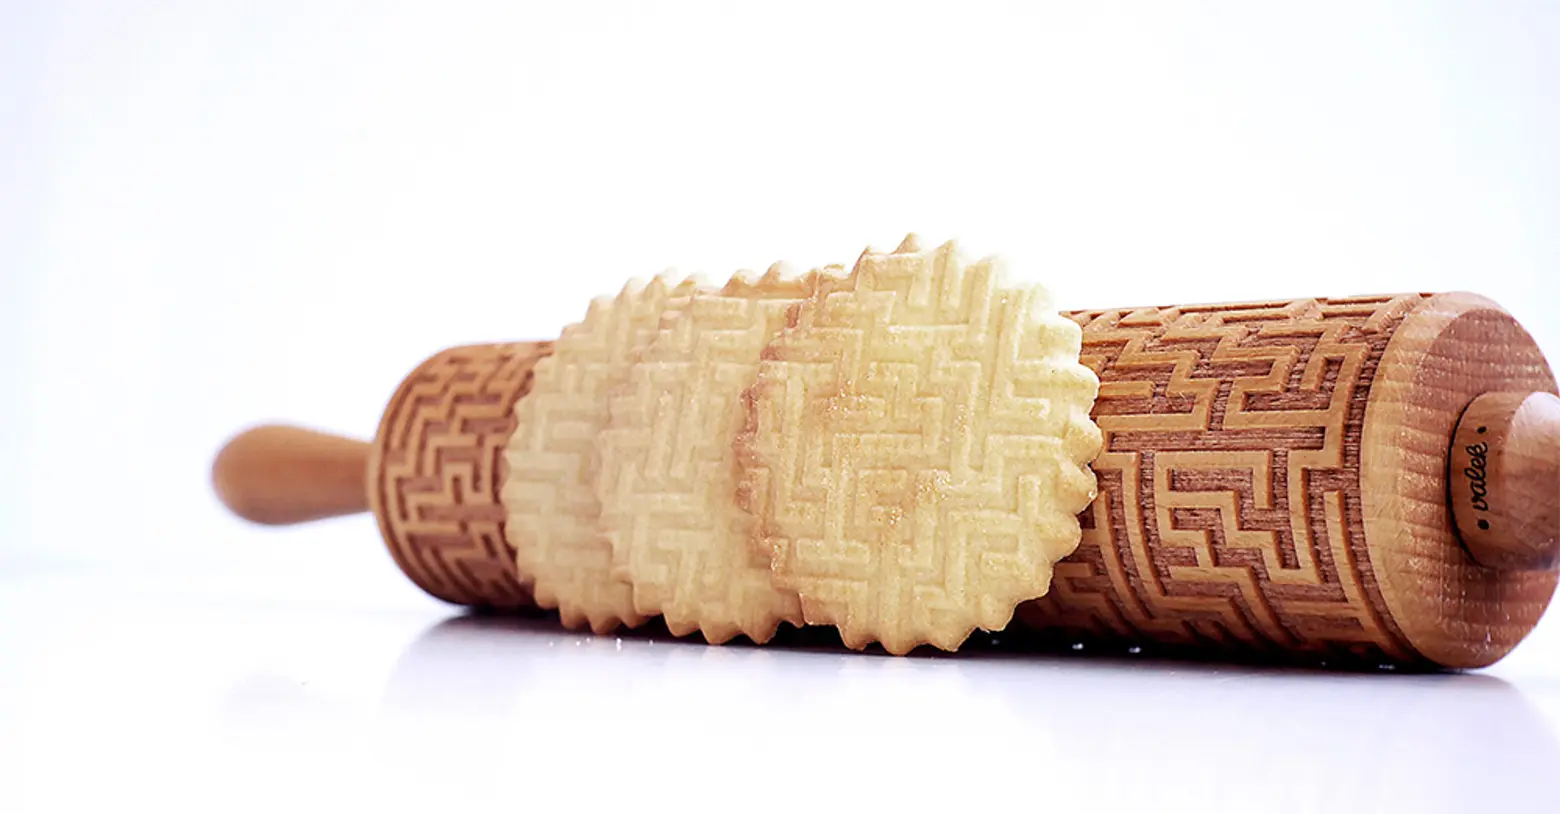 Laser-Engraved Rolling Pins Leave Fun Prints on Your Baked Goods